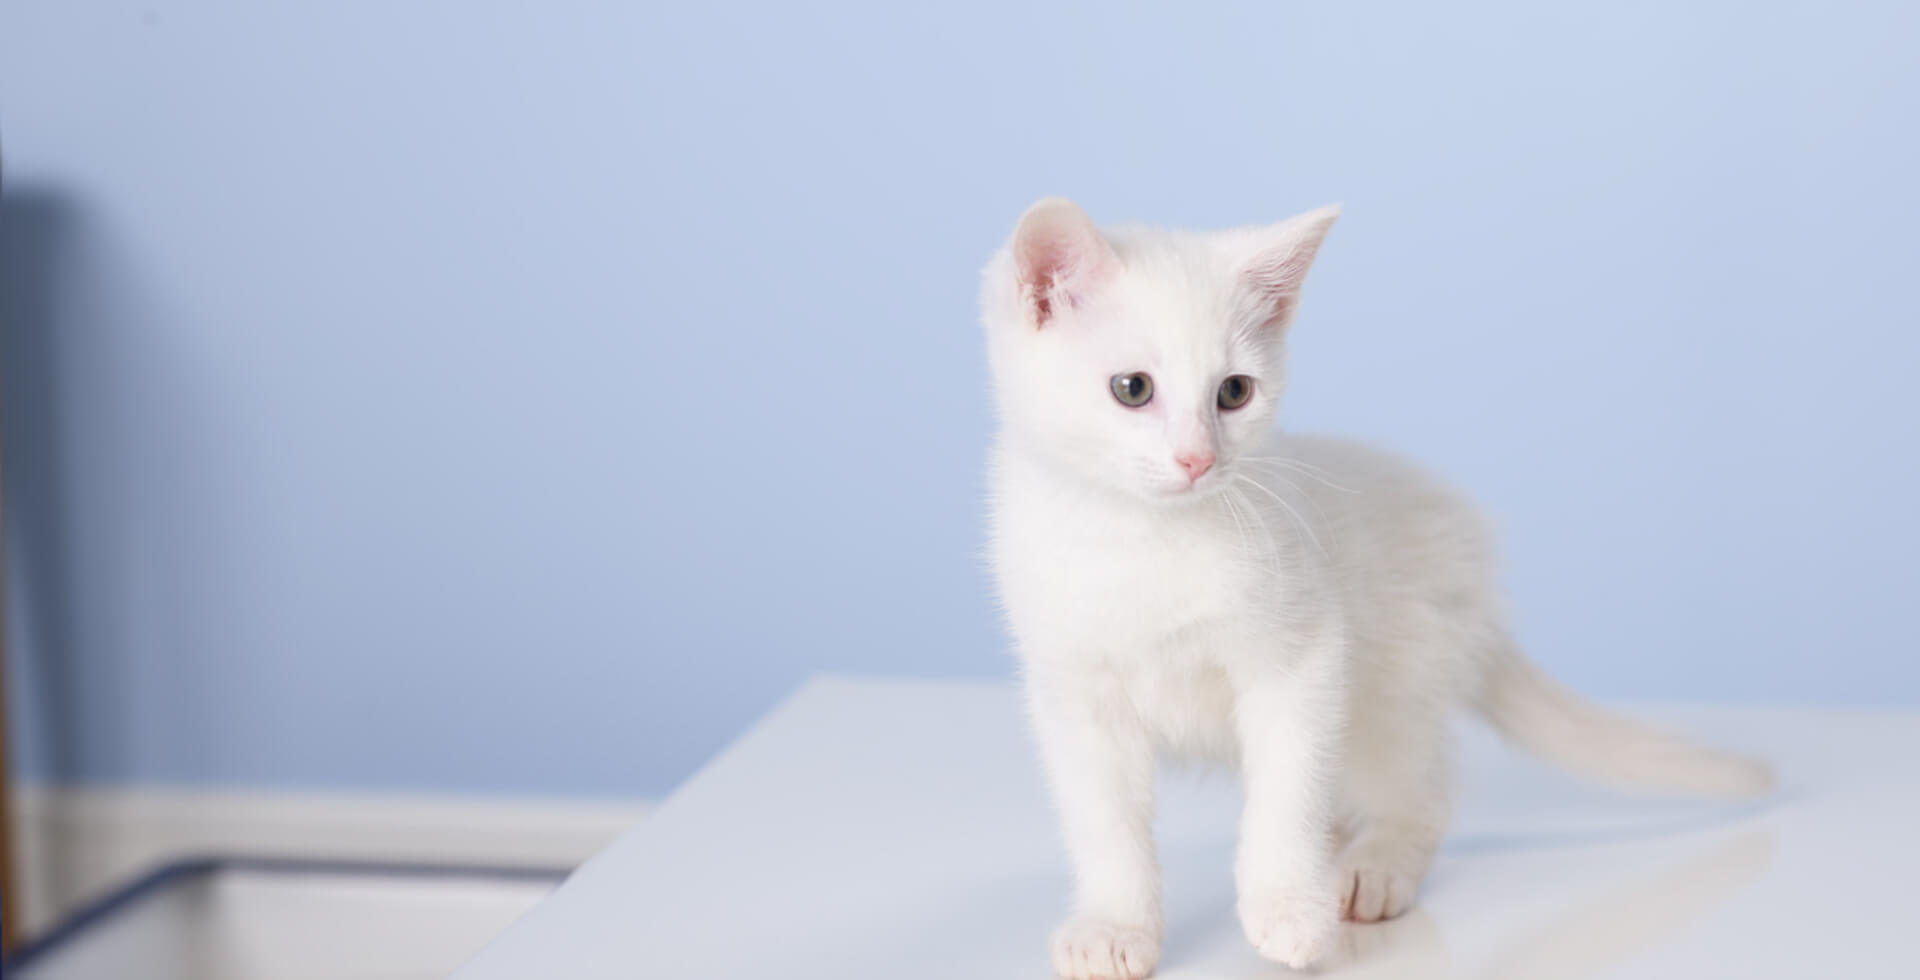 White kitten standing on smooth surface